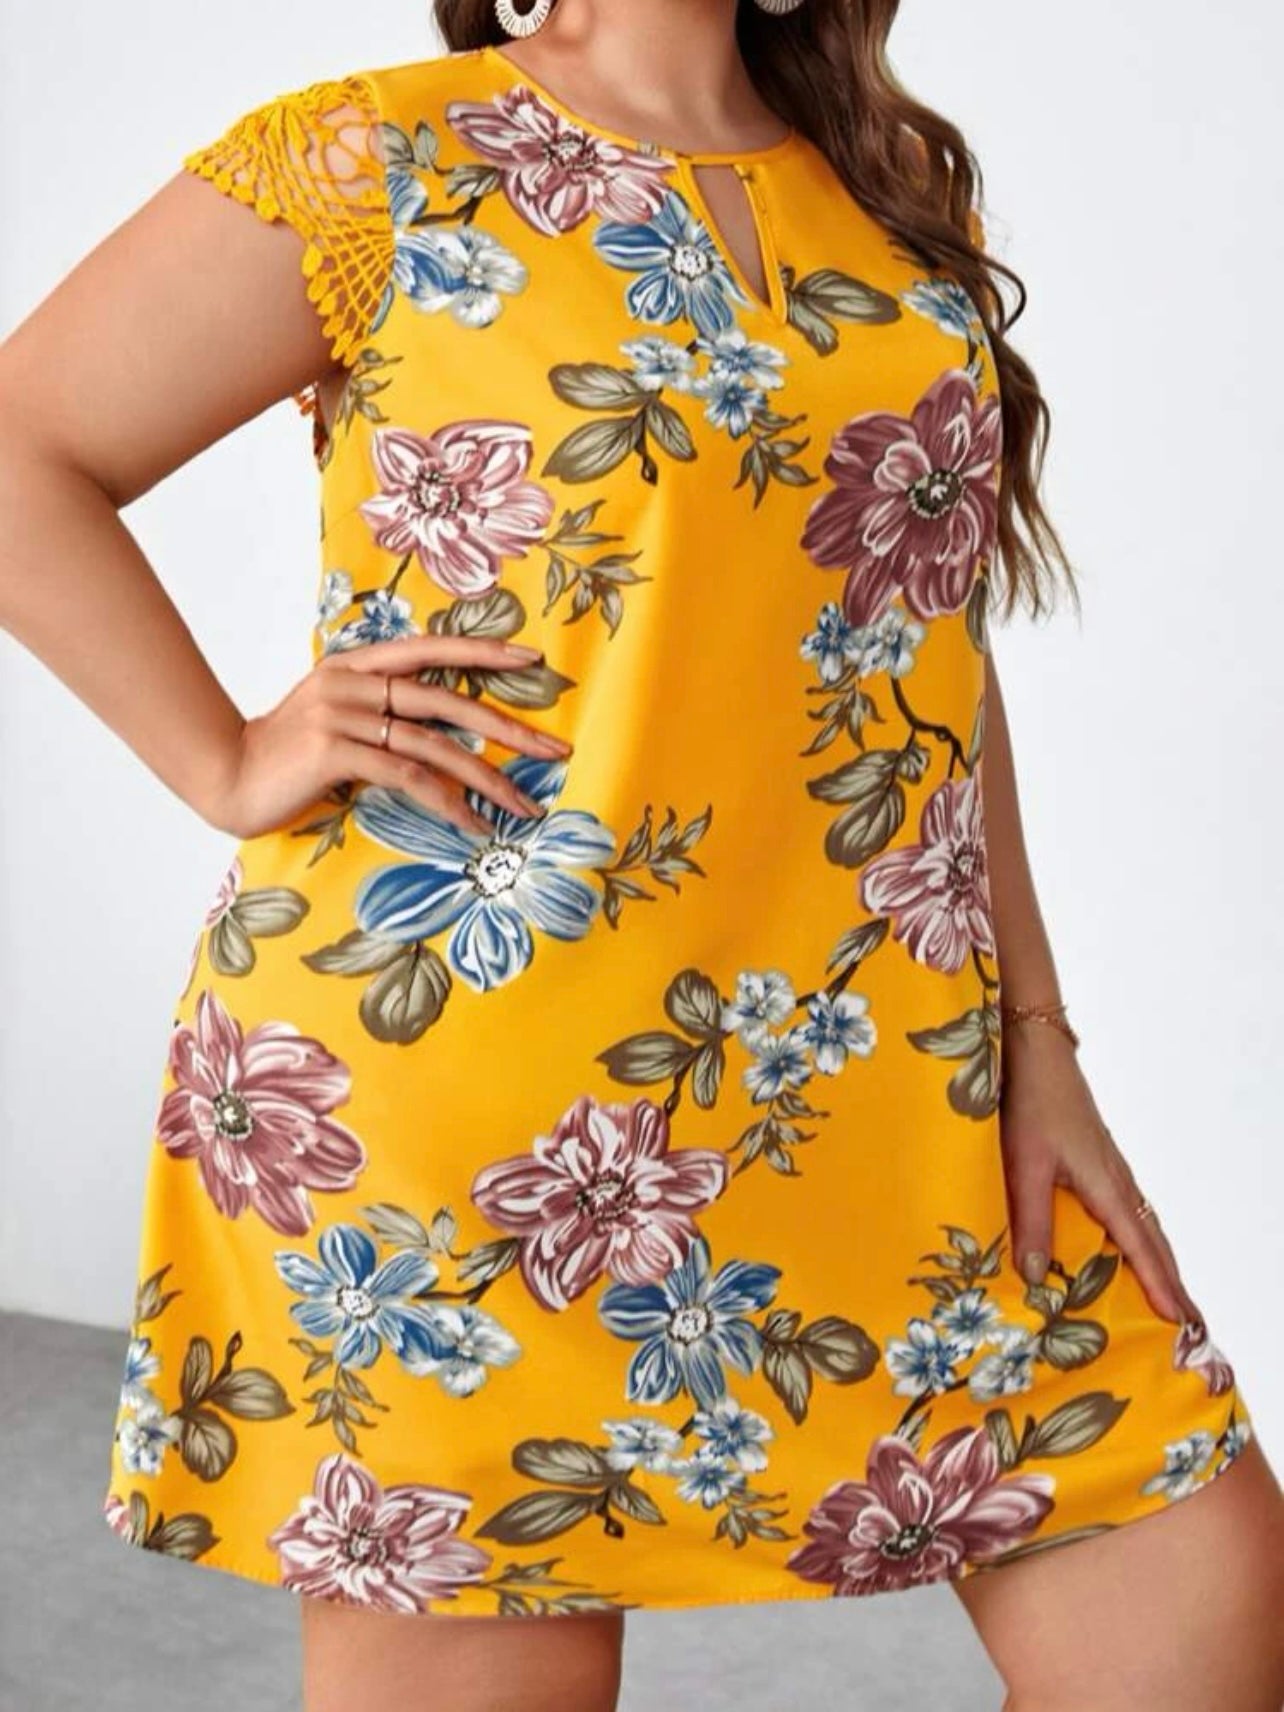 Embroidery Lace Sleeve Floral Plus Size Dress